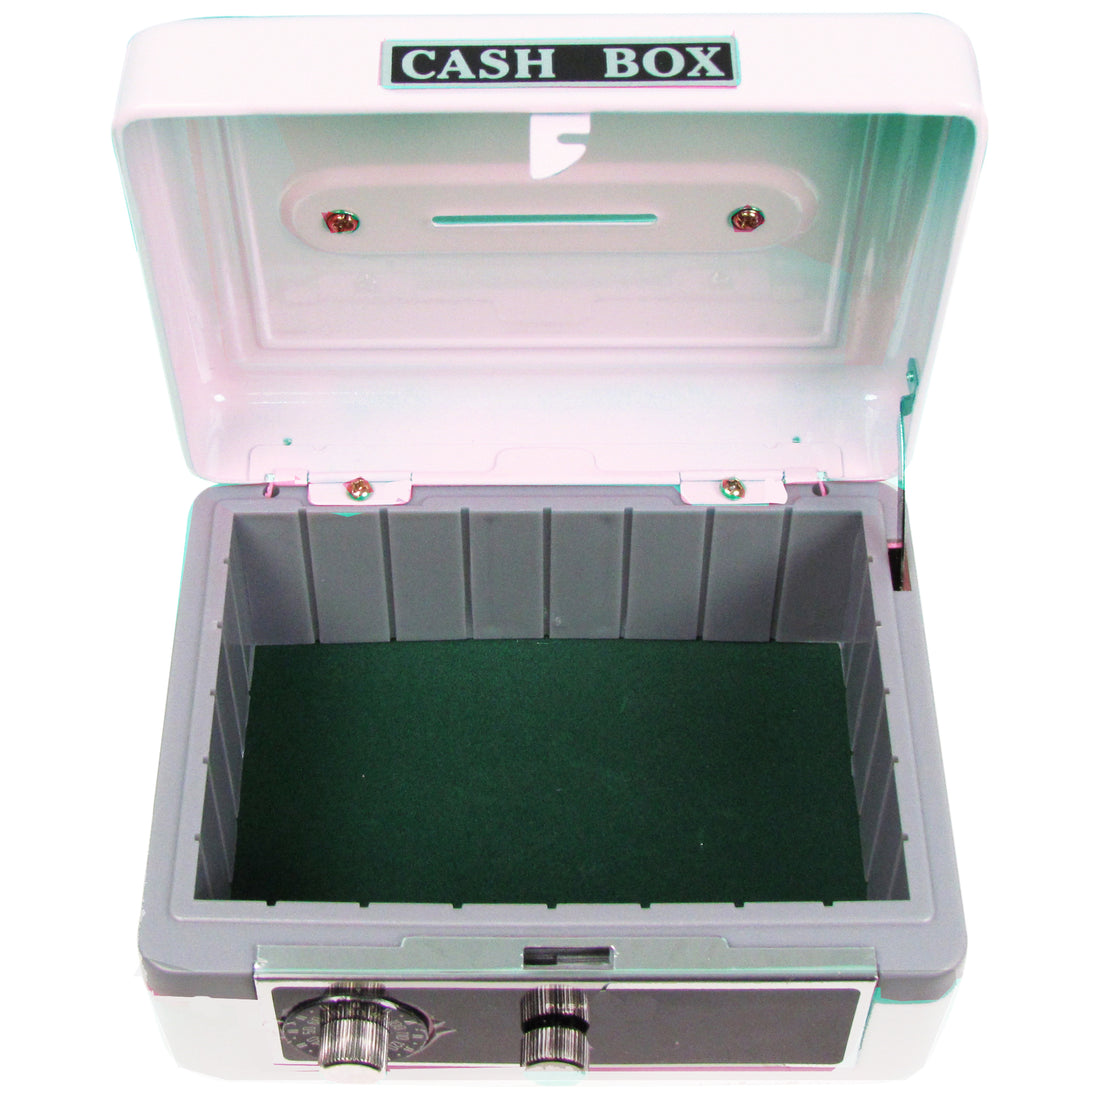 Personalized White Cash Box with Police design